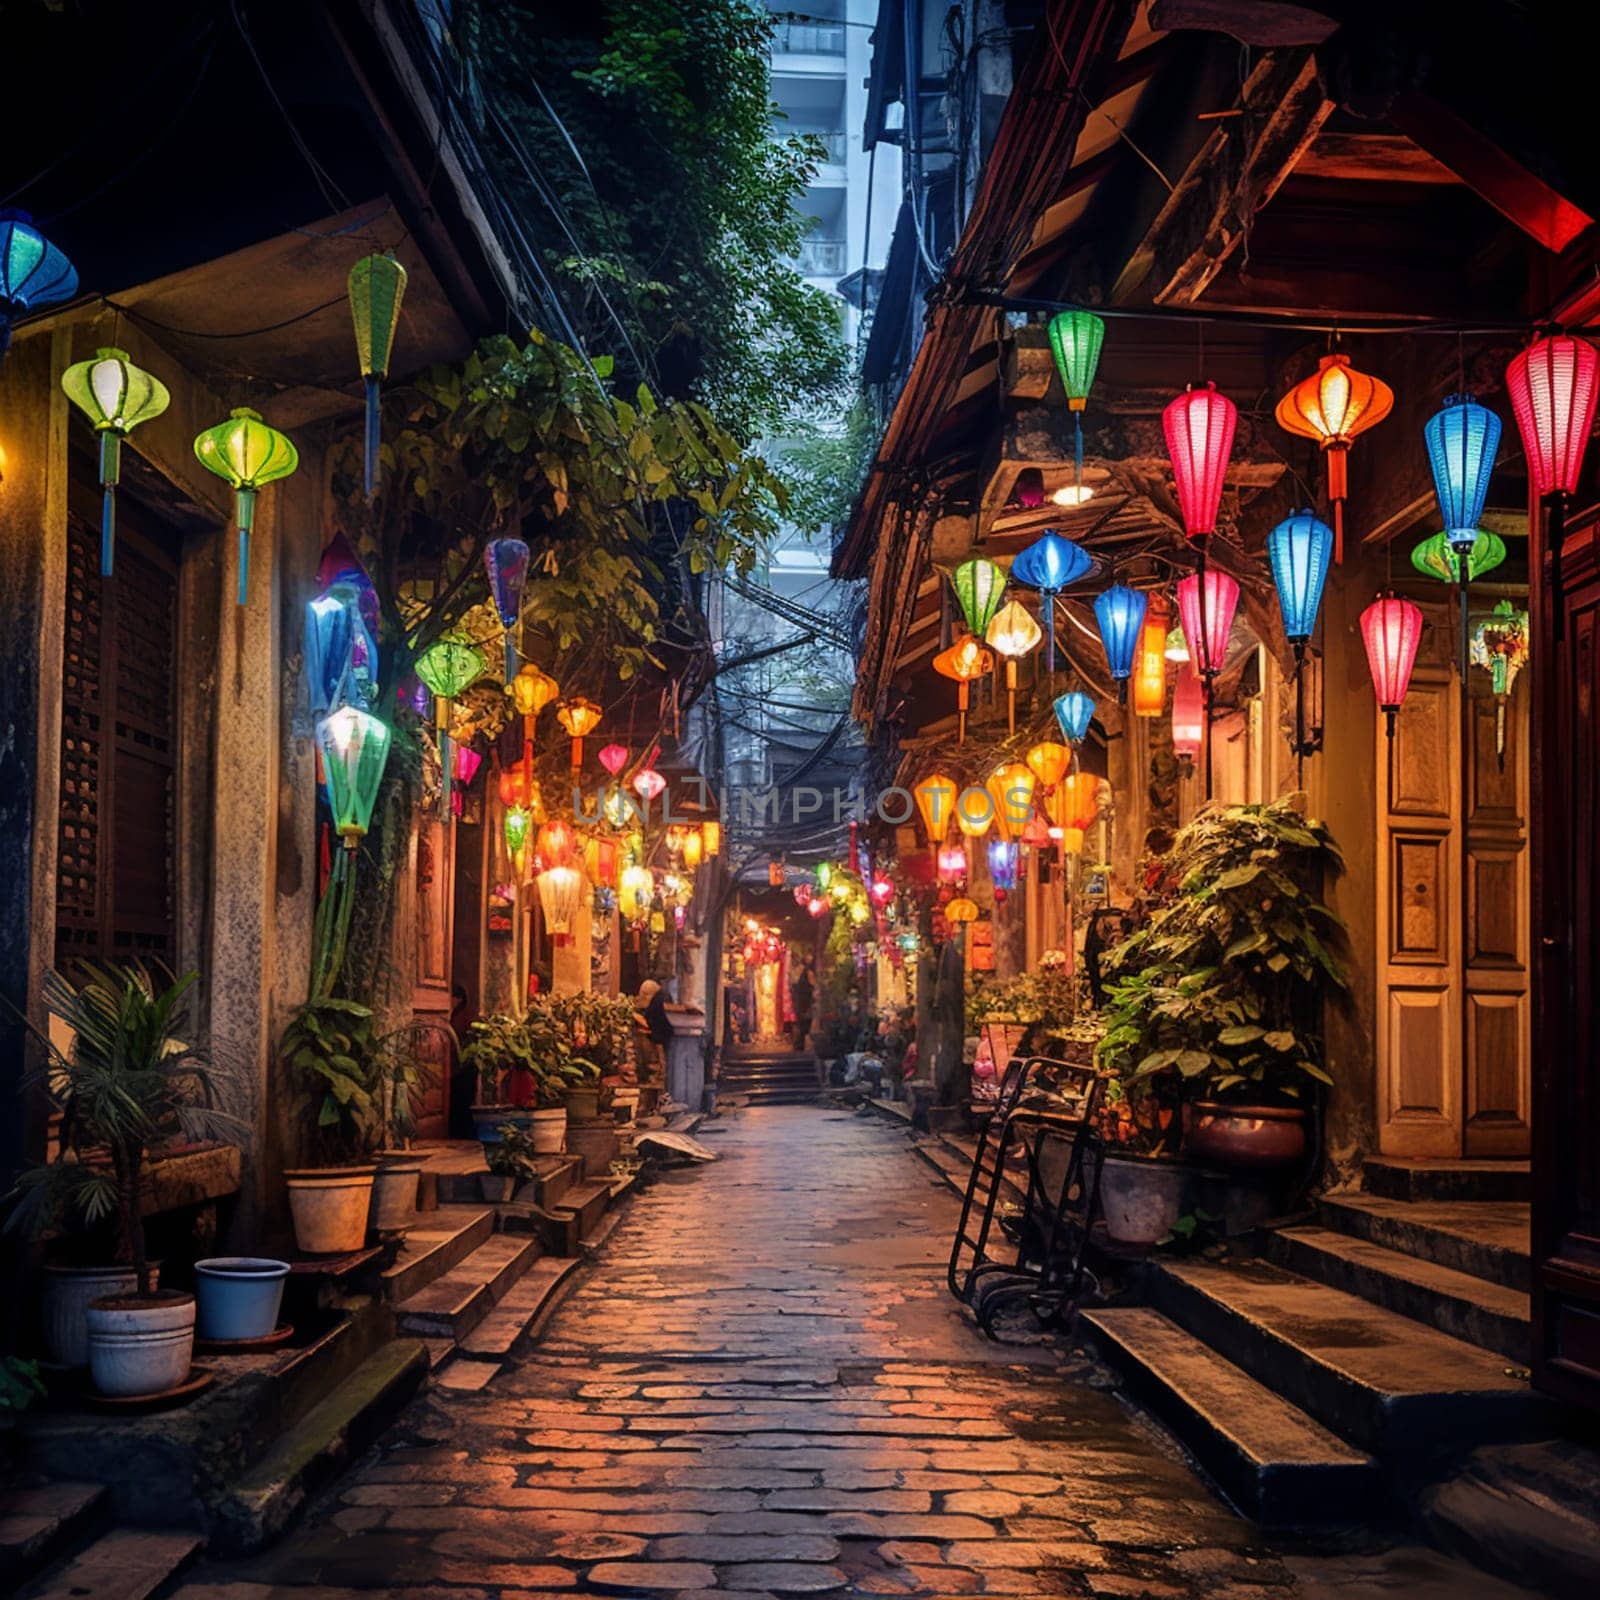 Immerse yourself in the captivating culture and history of Hanoi with this image featuring a magical alleyway adorned with vibrant lanterns. Follow the lantern-lit path to discover a tucked-away museum filled with ancient artifacts, surrounded by a burst of colors and local flavors. Experience the hidden gems of Hanoi and be amazed by the unexpected wonders this enchanting city has to offer.